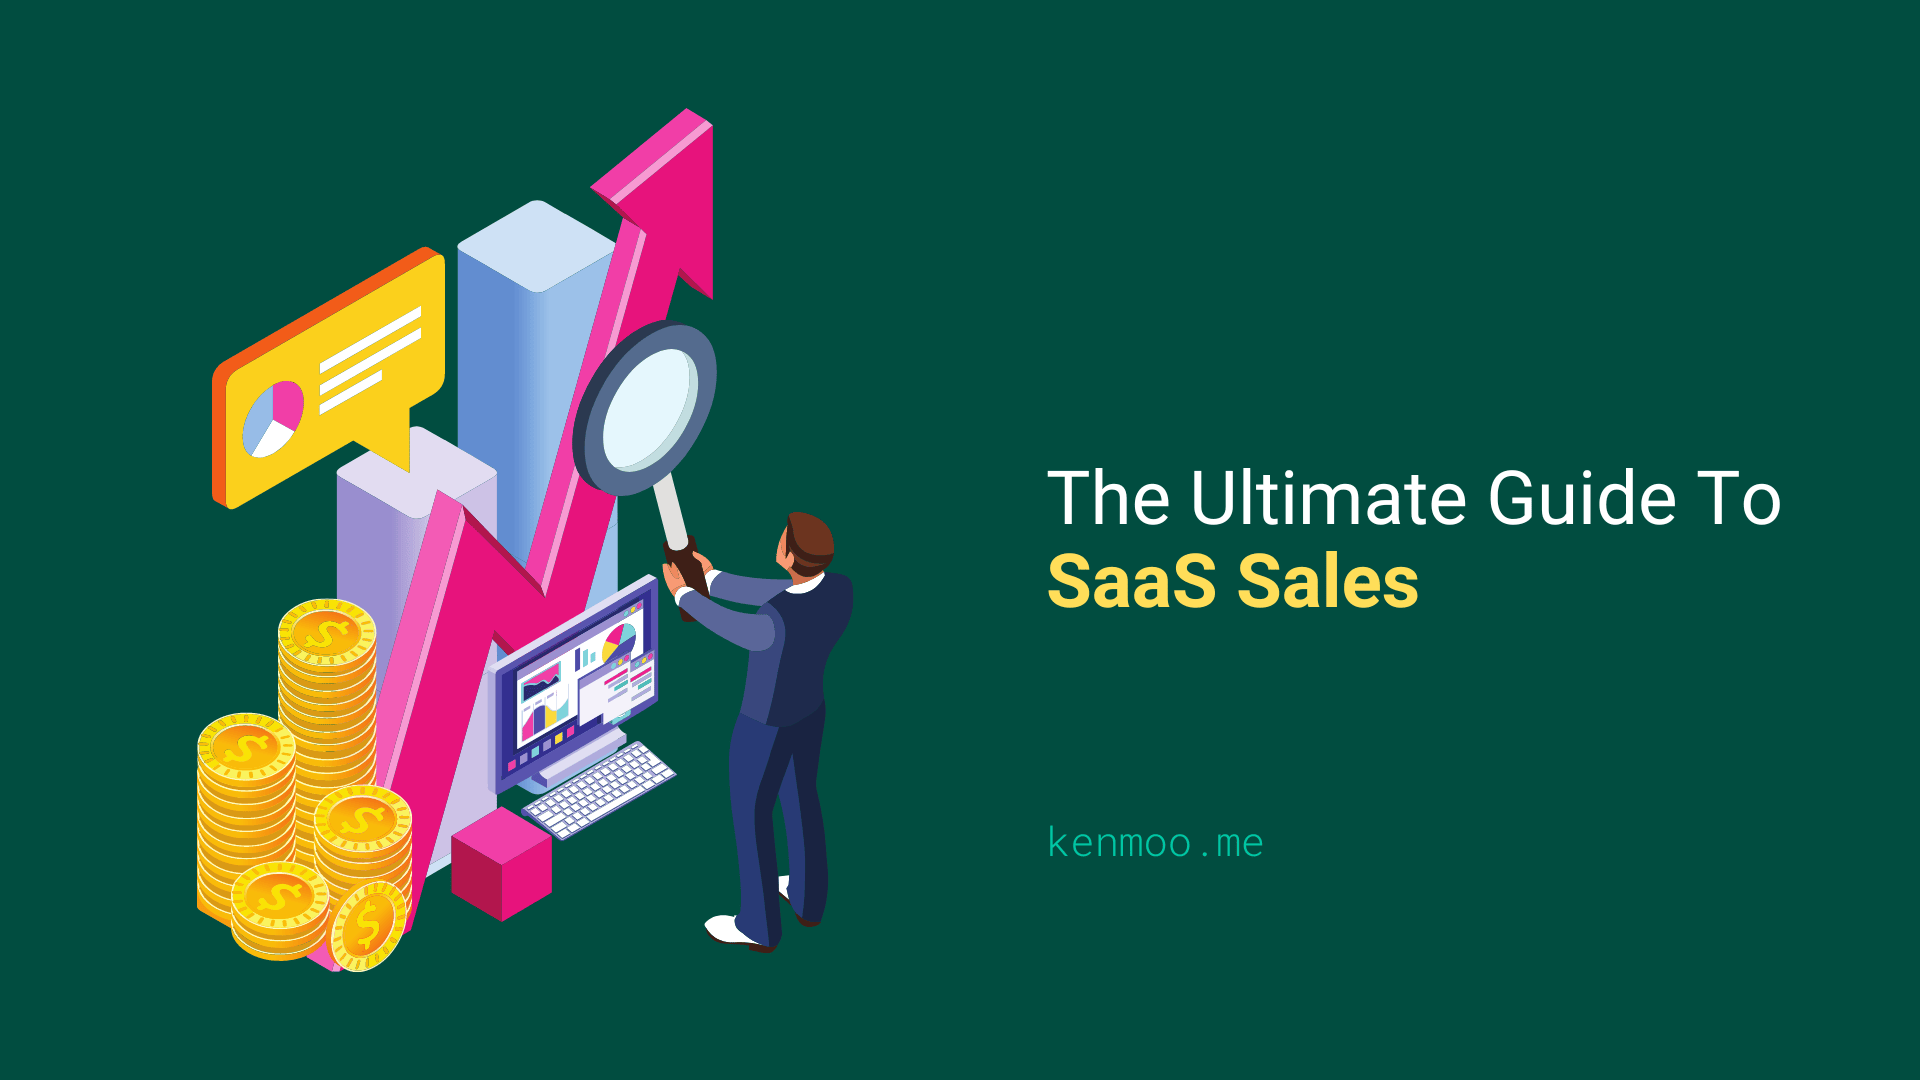 The Ultimate Guide To SaaS Sales